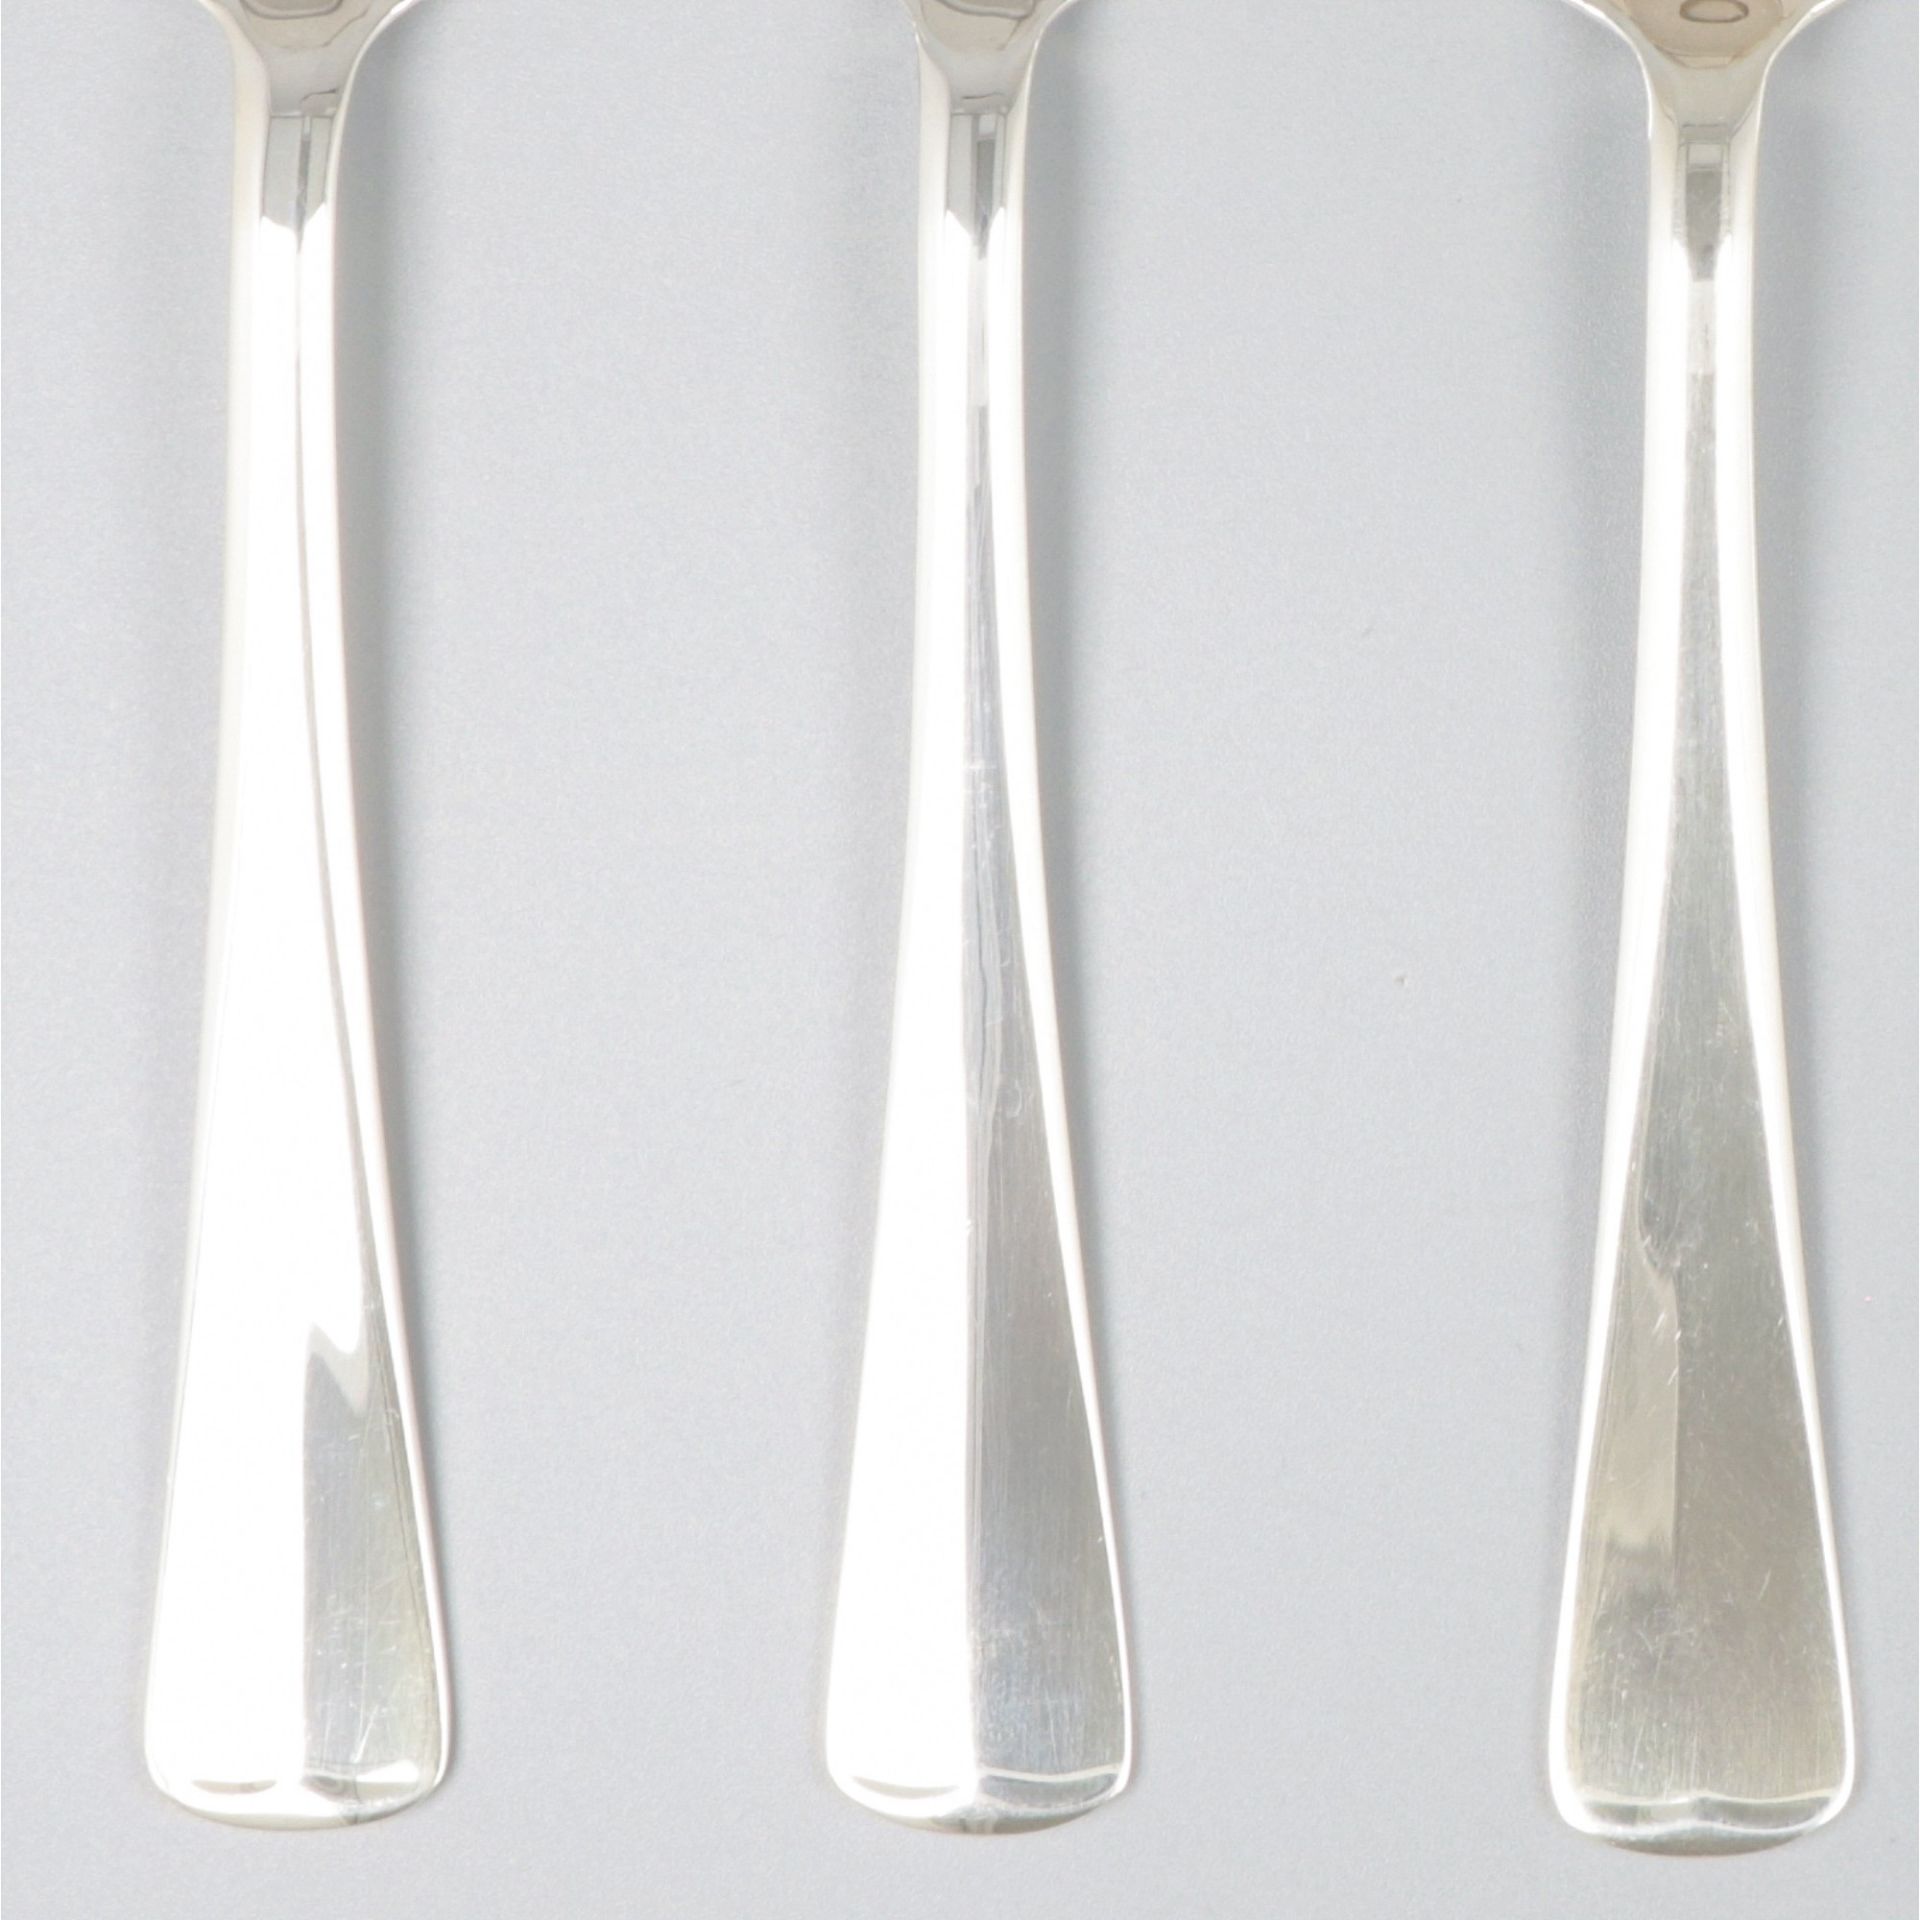 6-piece set of spoons ''Haags Lofje'' silver. - Image 4 of 5